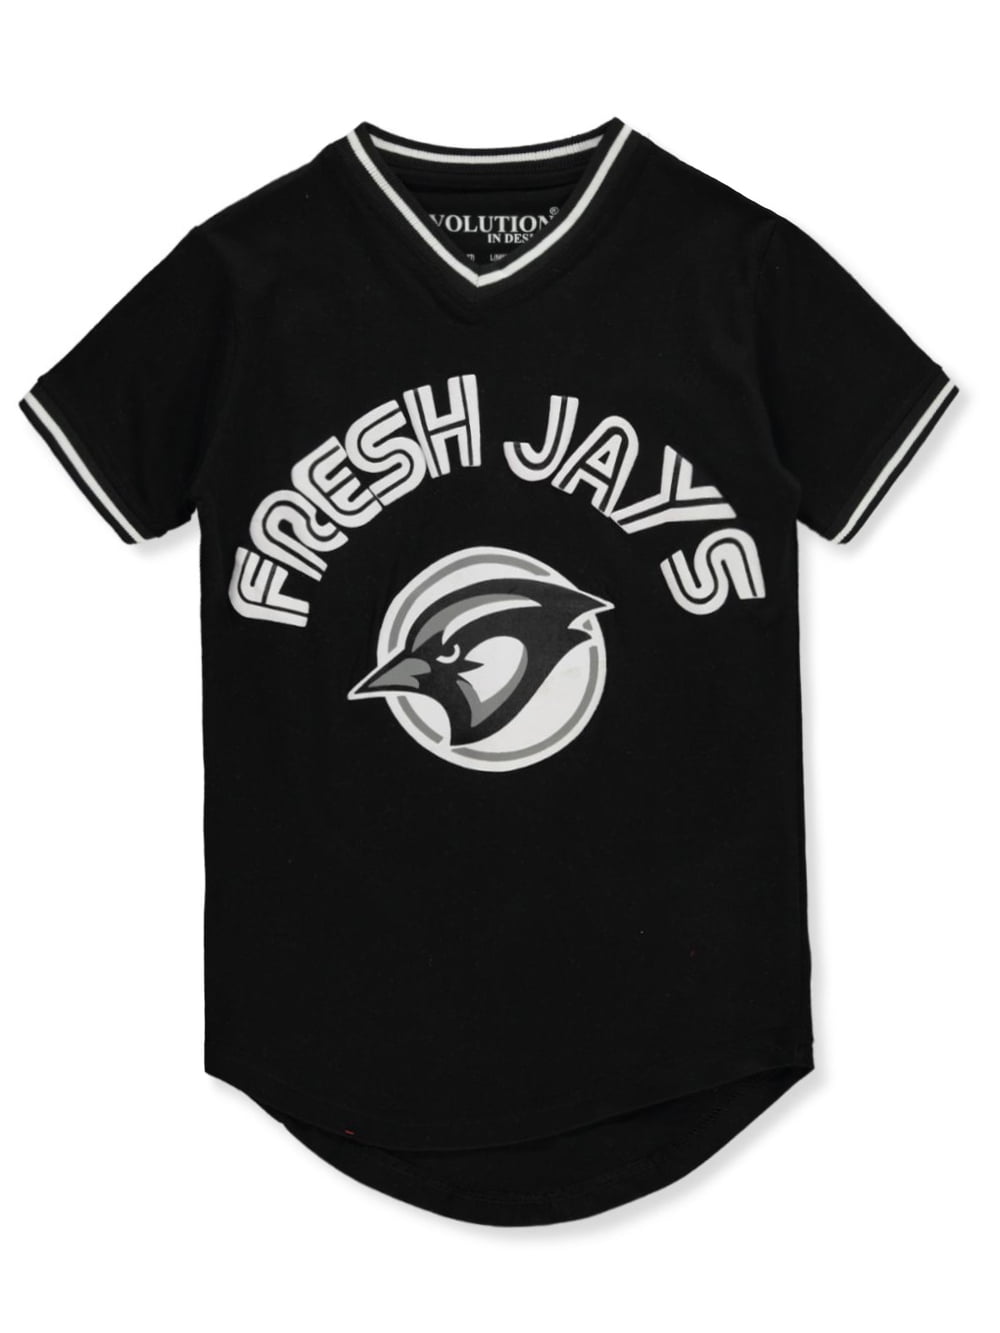 black and white blue jays jersey